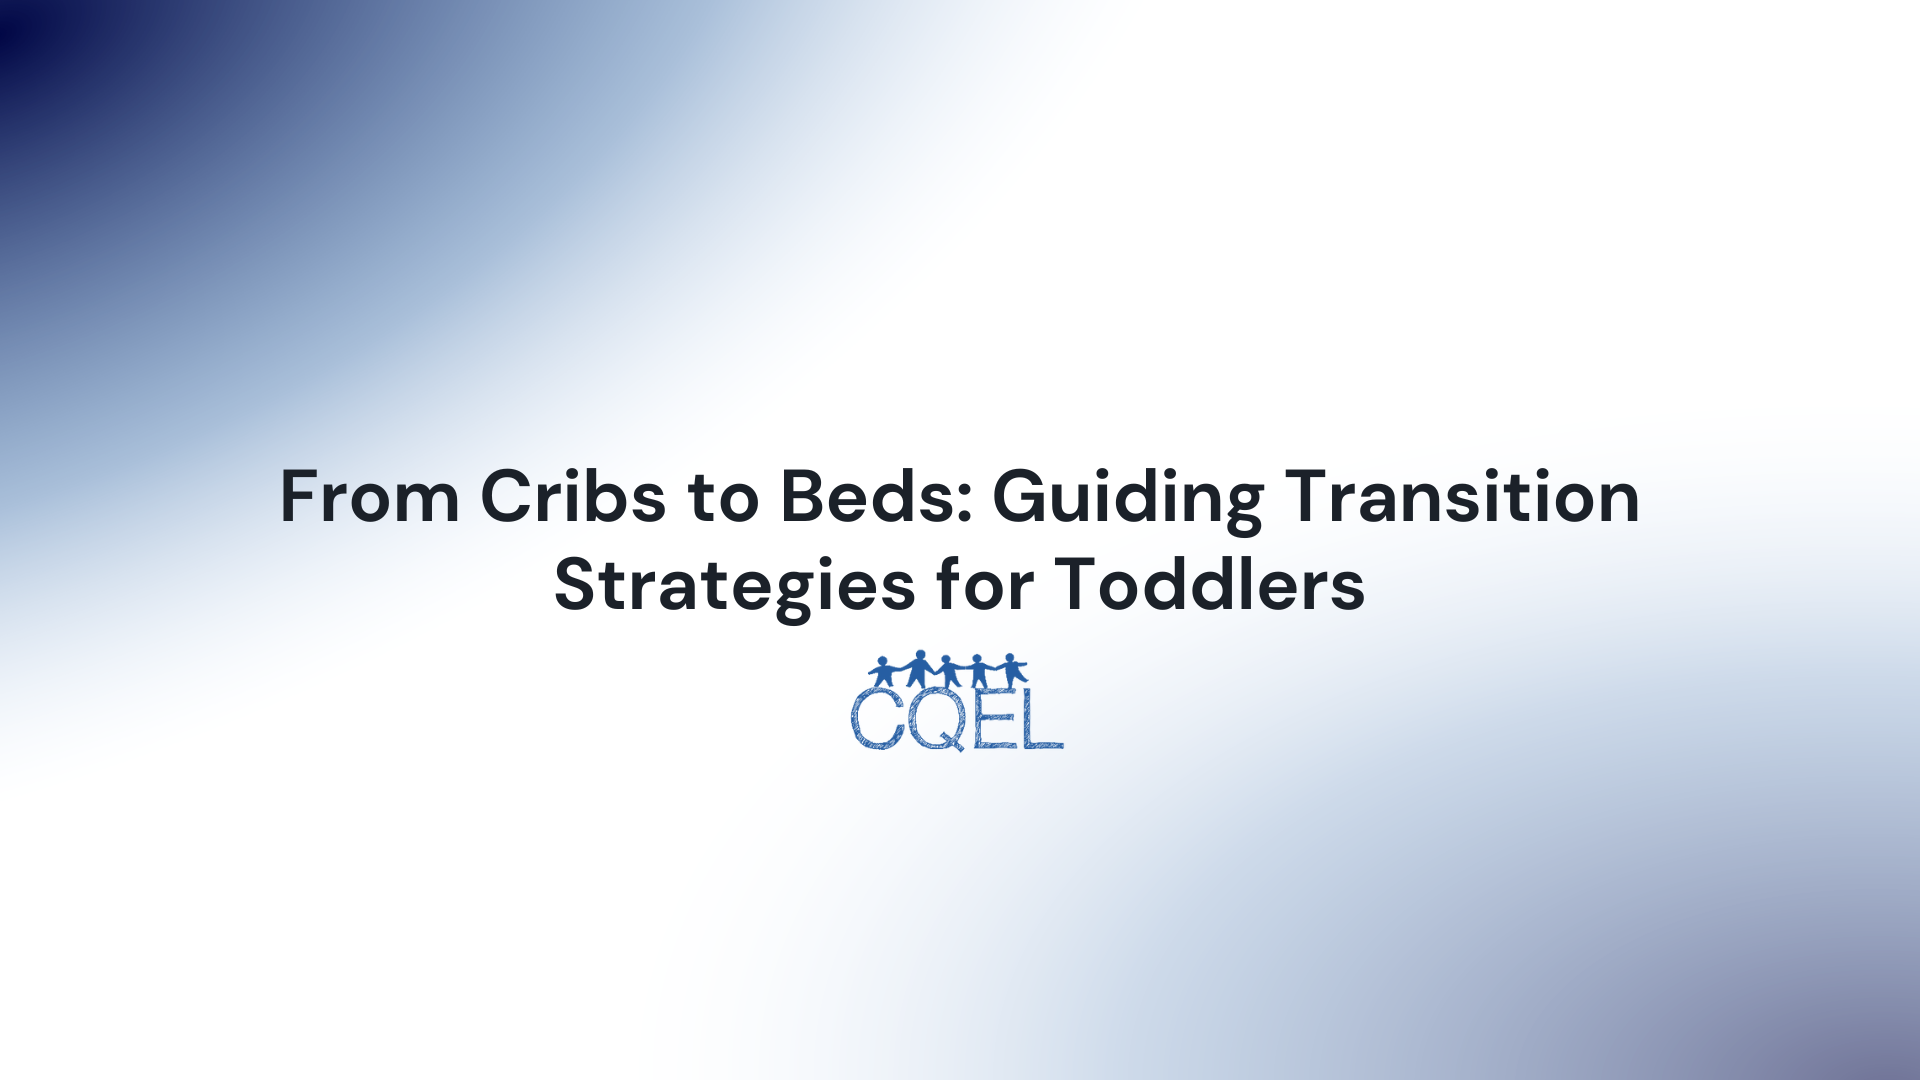 From Cribs to Beds: Guiding Transition Strategies for Toddlers